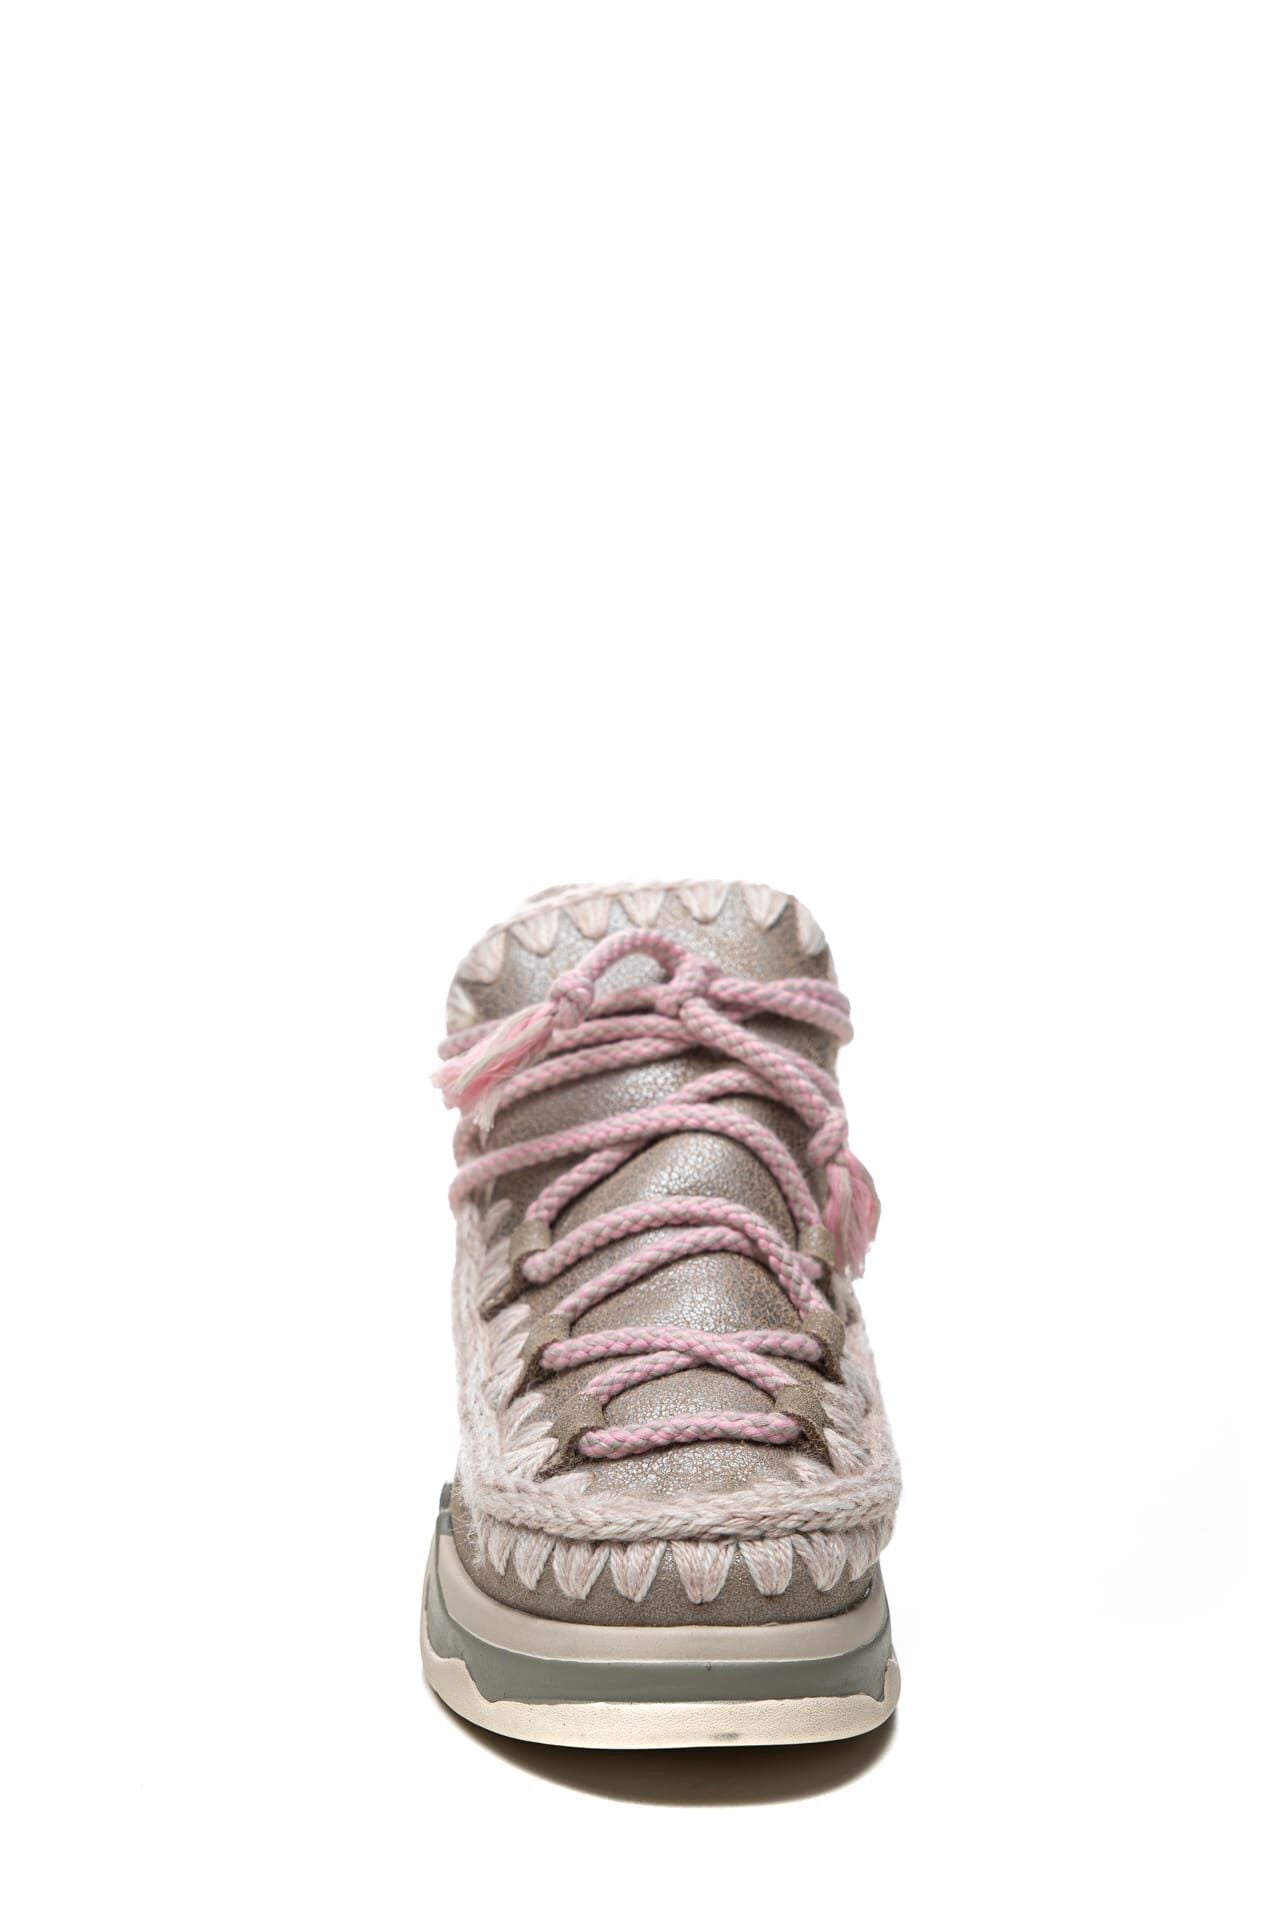 MOU FW20124B TRAINER 02 SCOUBIDOO LACE STM